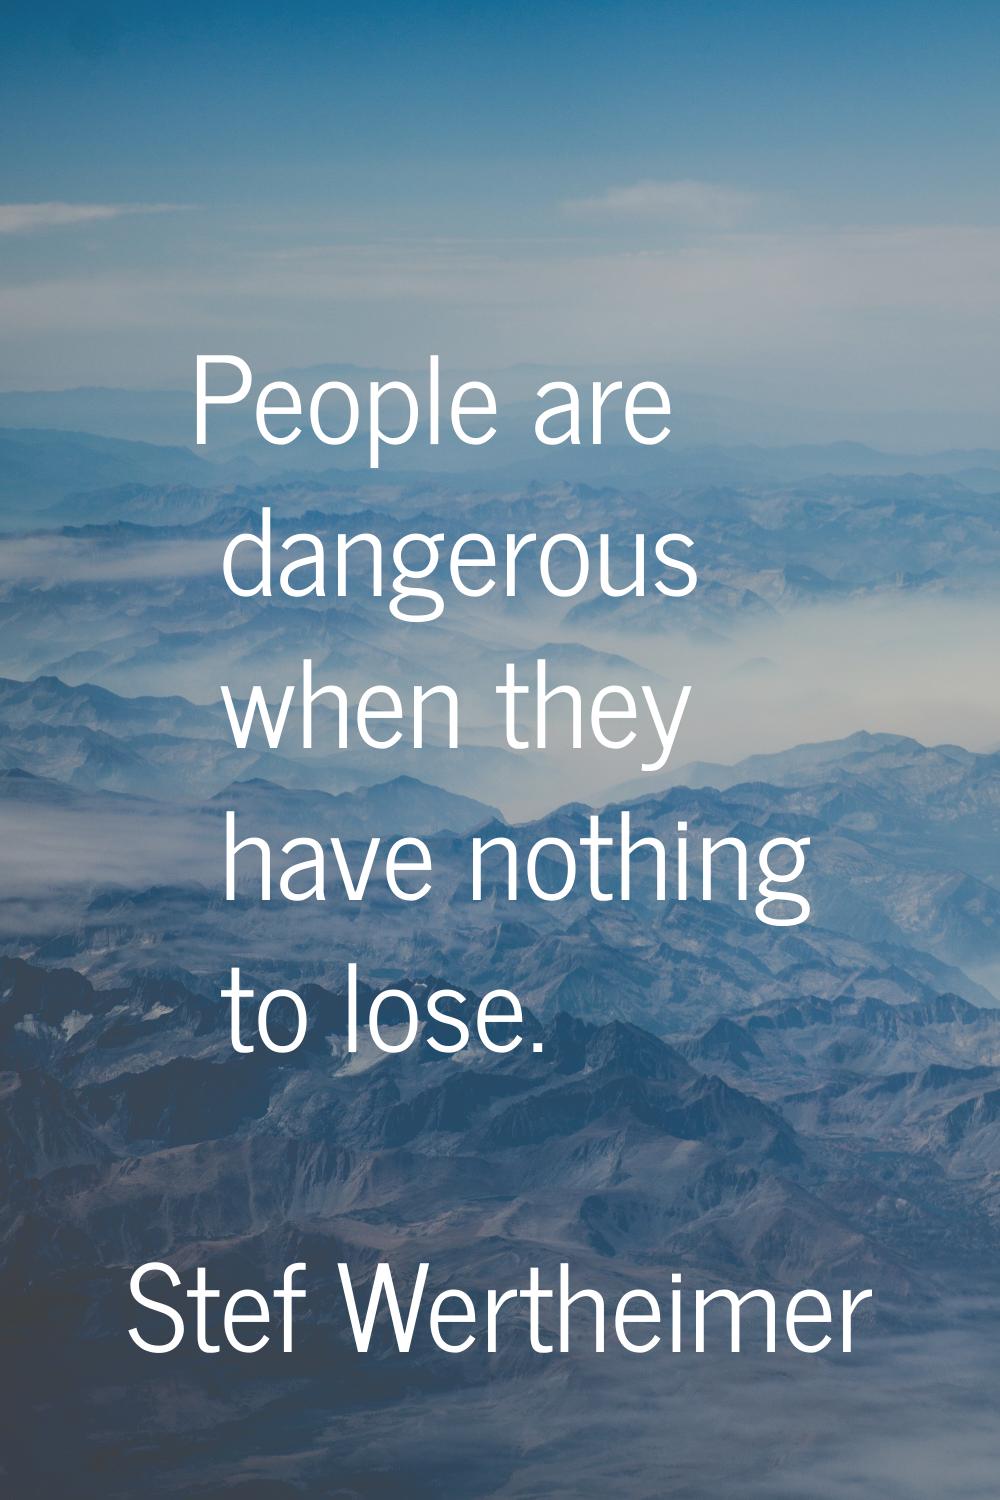 People are dangerous when they have nothing to lose.